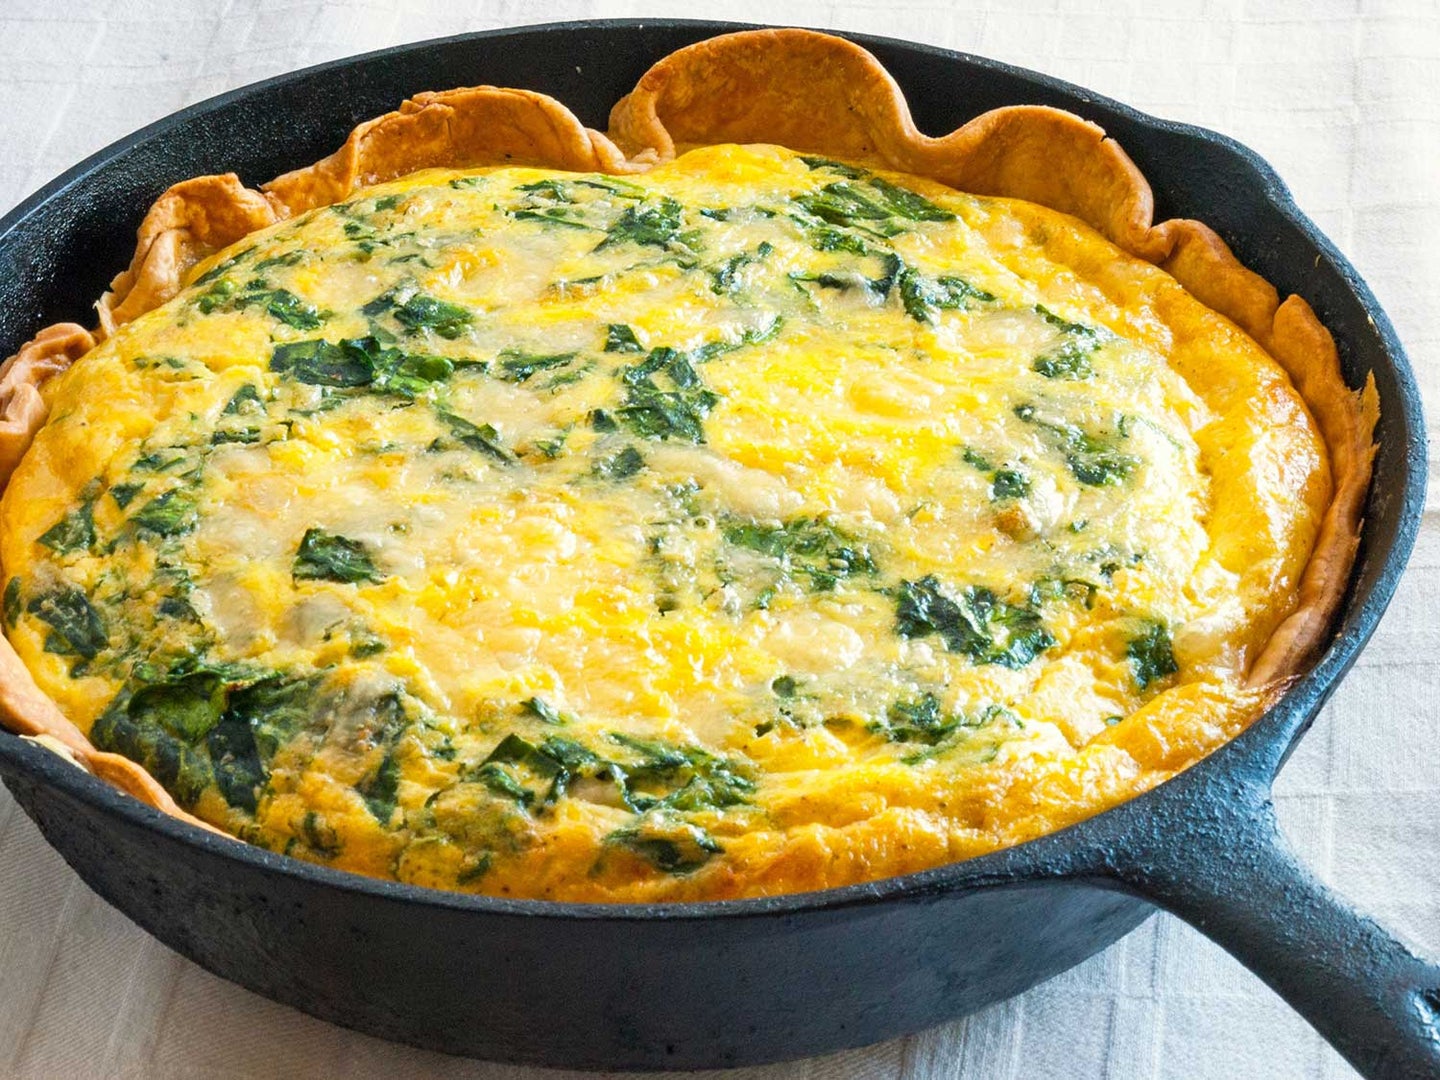 Cast iron skillet with quiche.